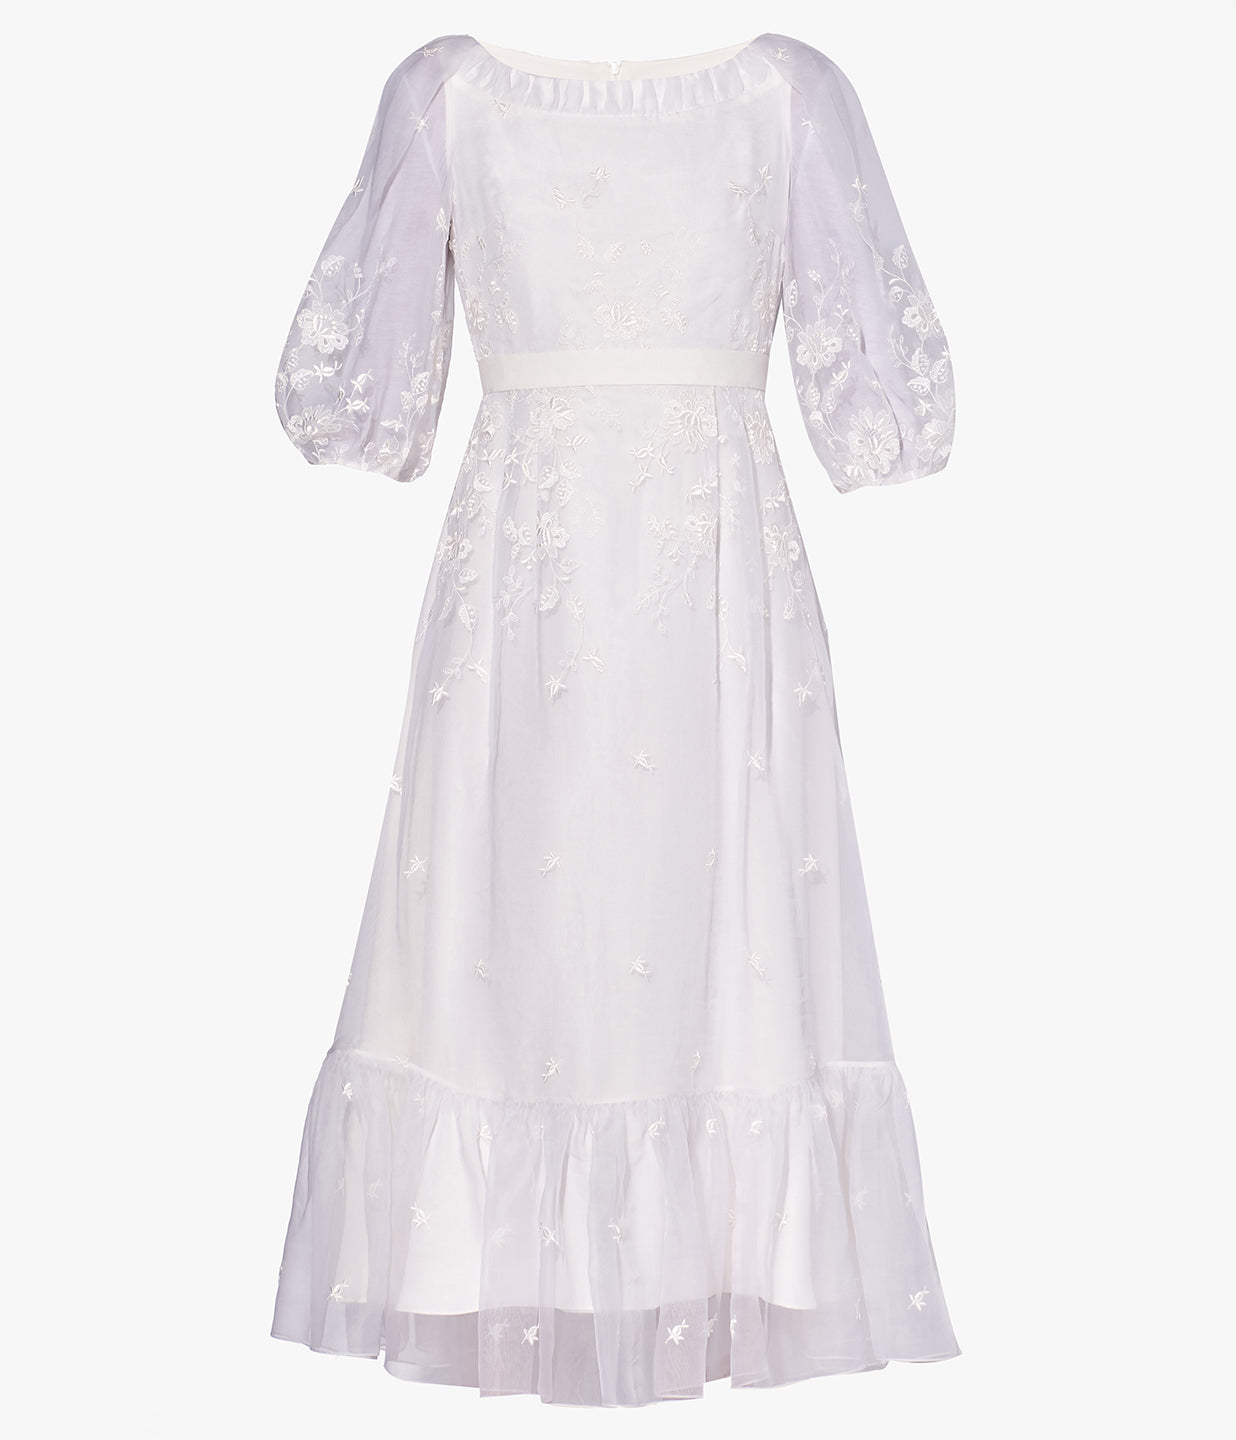 Floredice Embroidered Wedding Dress from Erdem’s White Collection of luxury bridal wear.